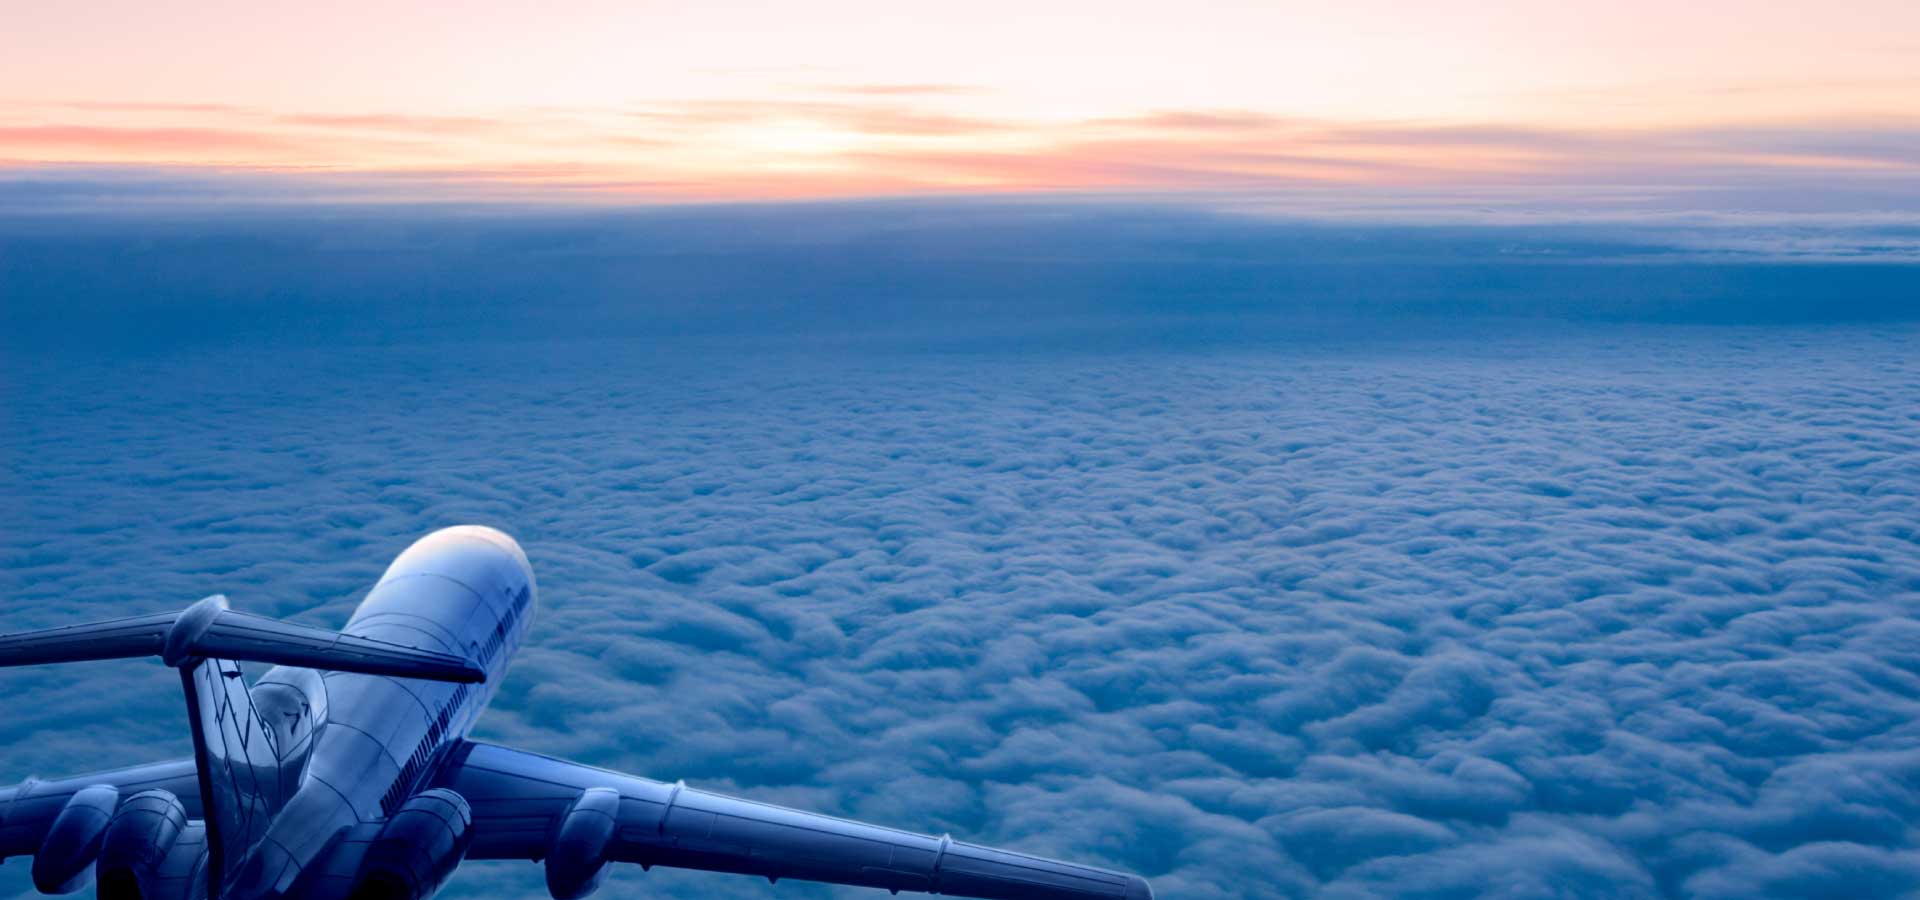 Private jet above the clouds during sunrise